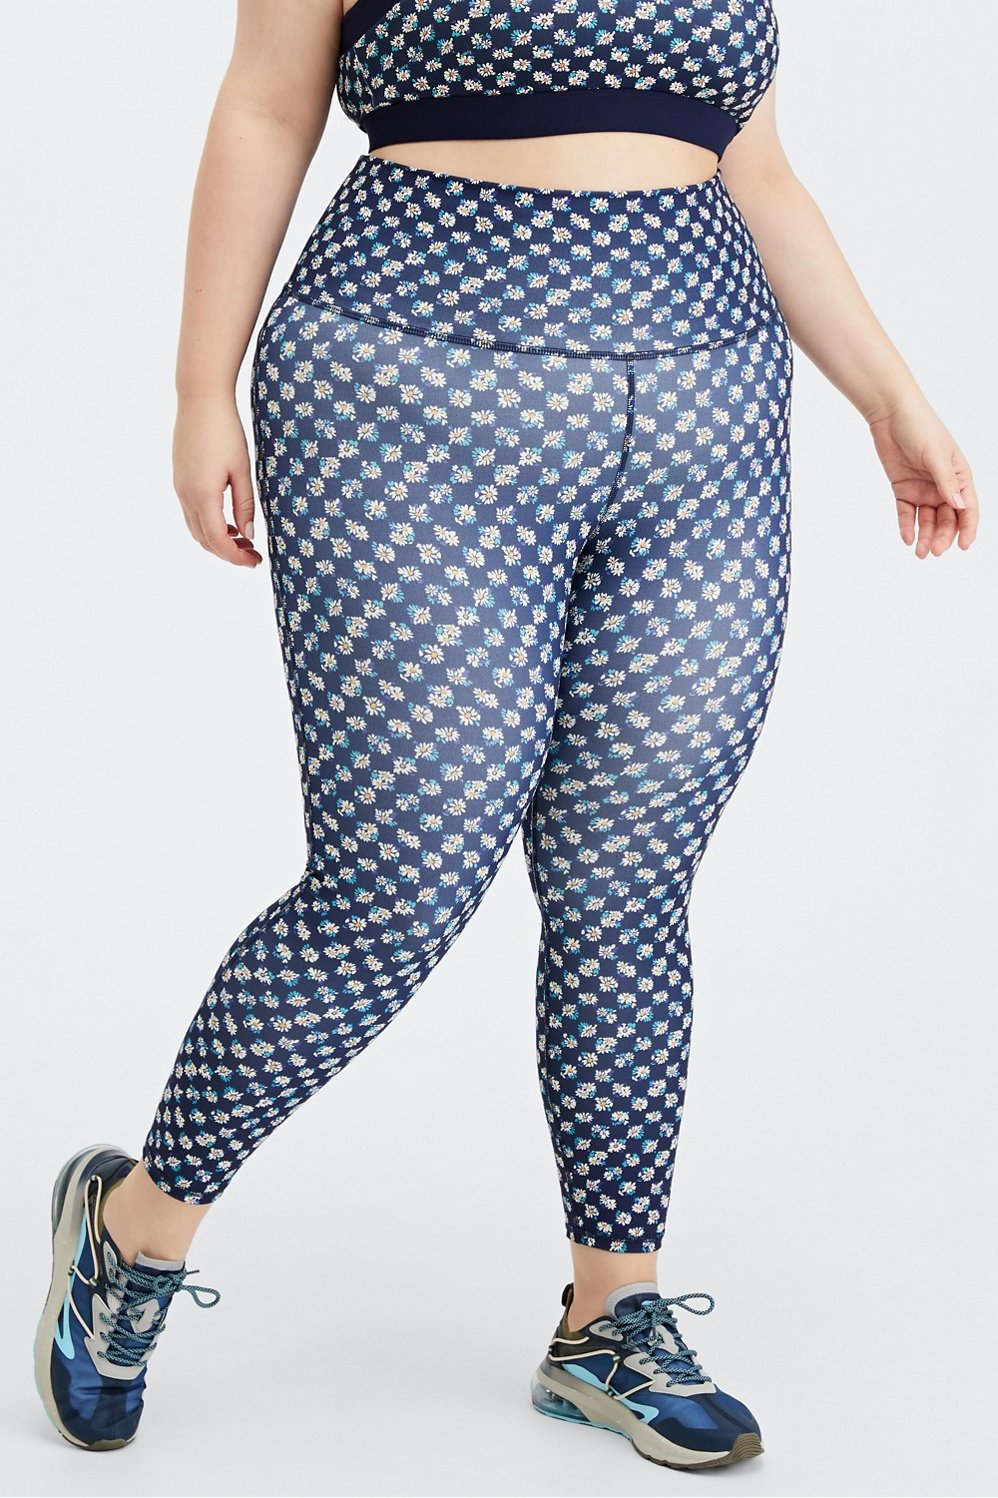 Fabletics Daisy Print Ultra High-Waisted PureLuxe 7/8 Leggings L Floral  Blue NWT